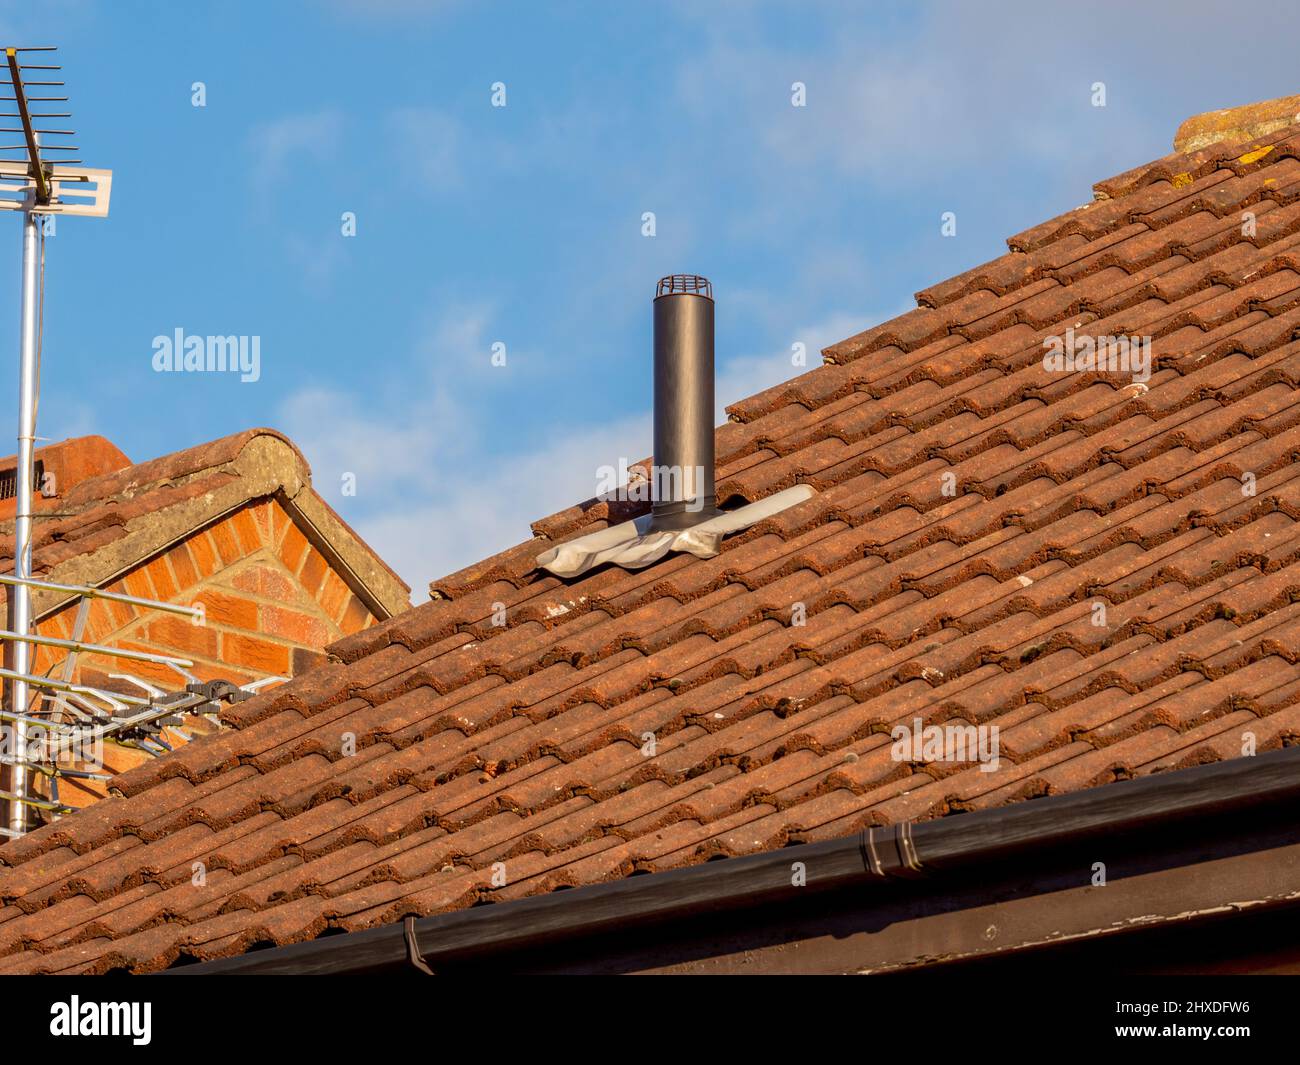 Typical domestic tiled house roof with Vent pipe protruding through tiles. Stock Photo